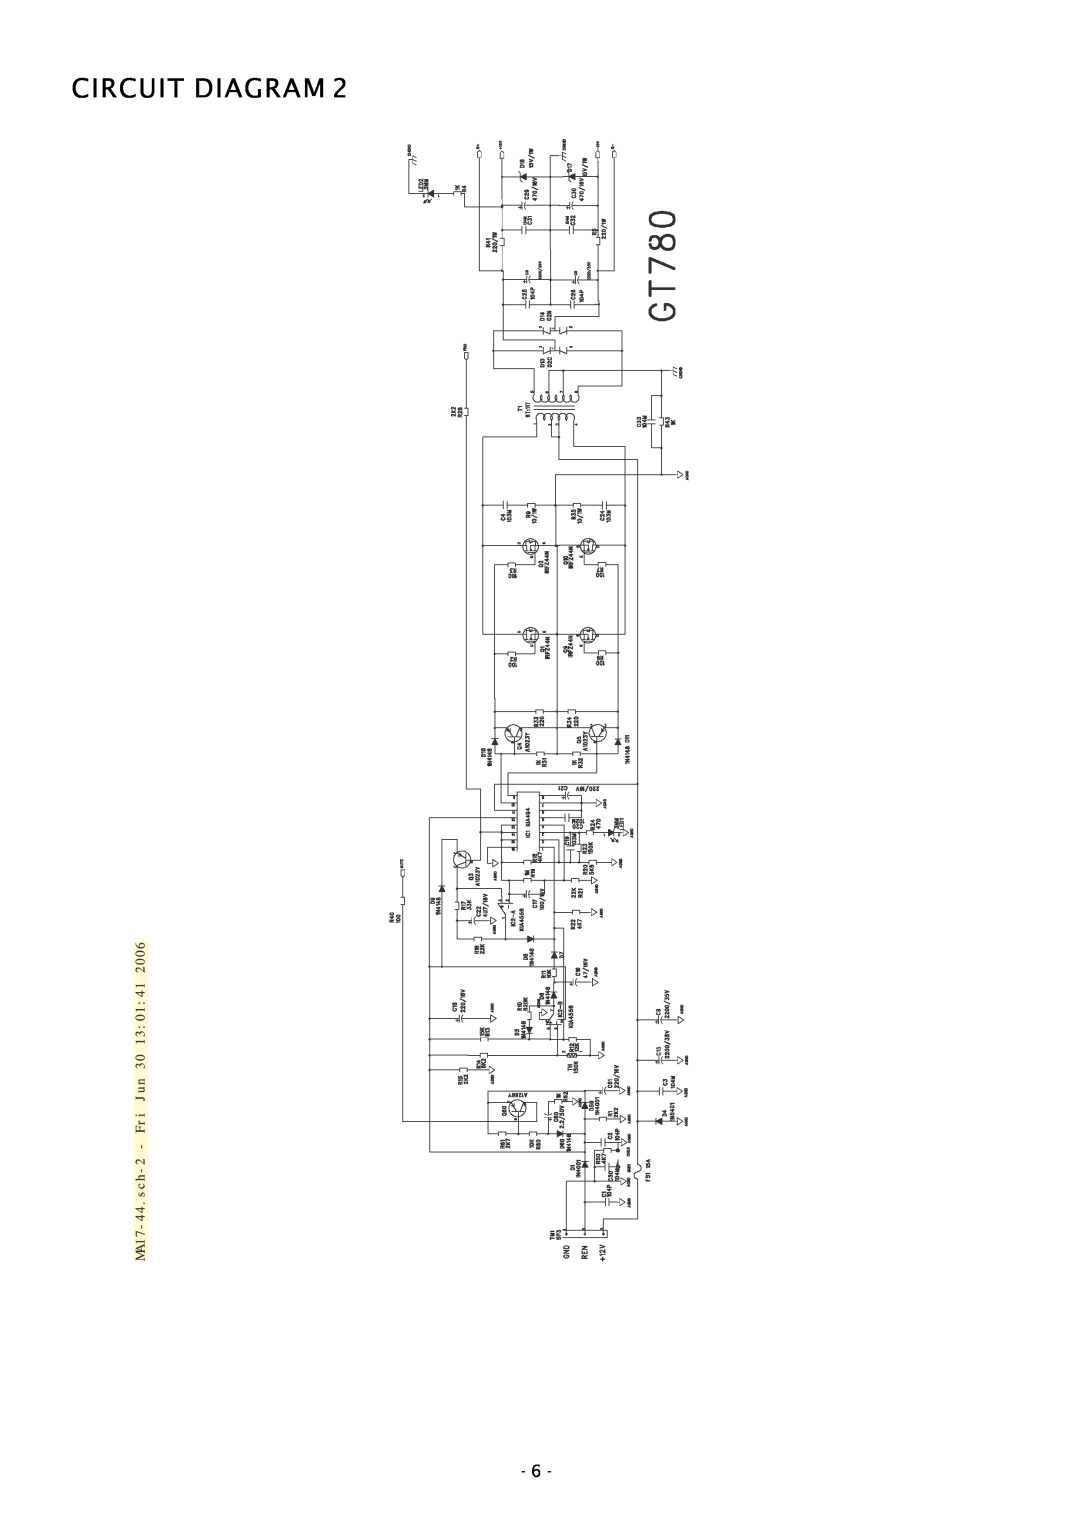 Boss Audio Systems GT780 service manual Circuit Diagram 